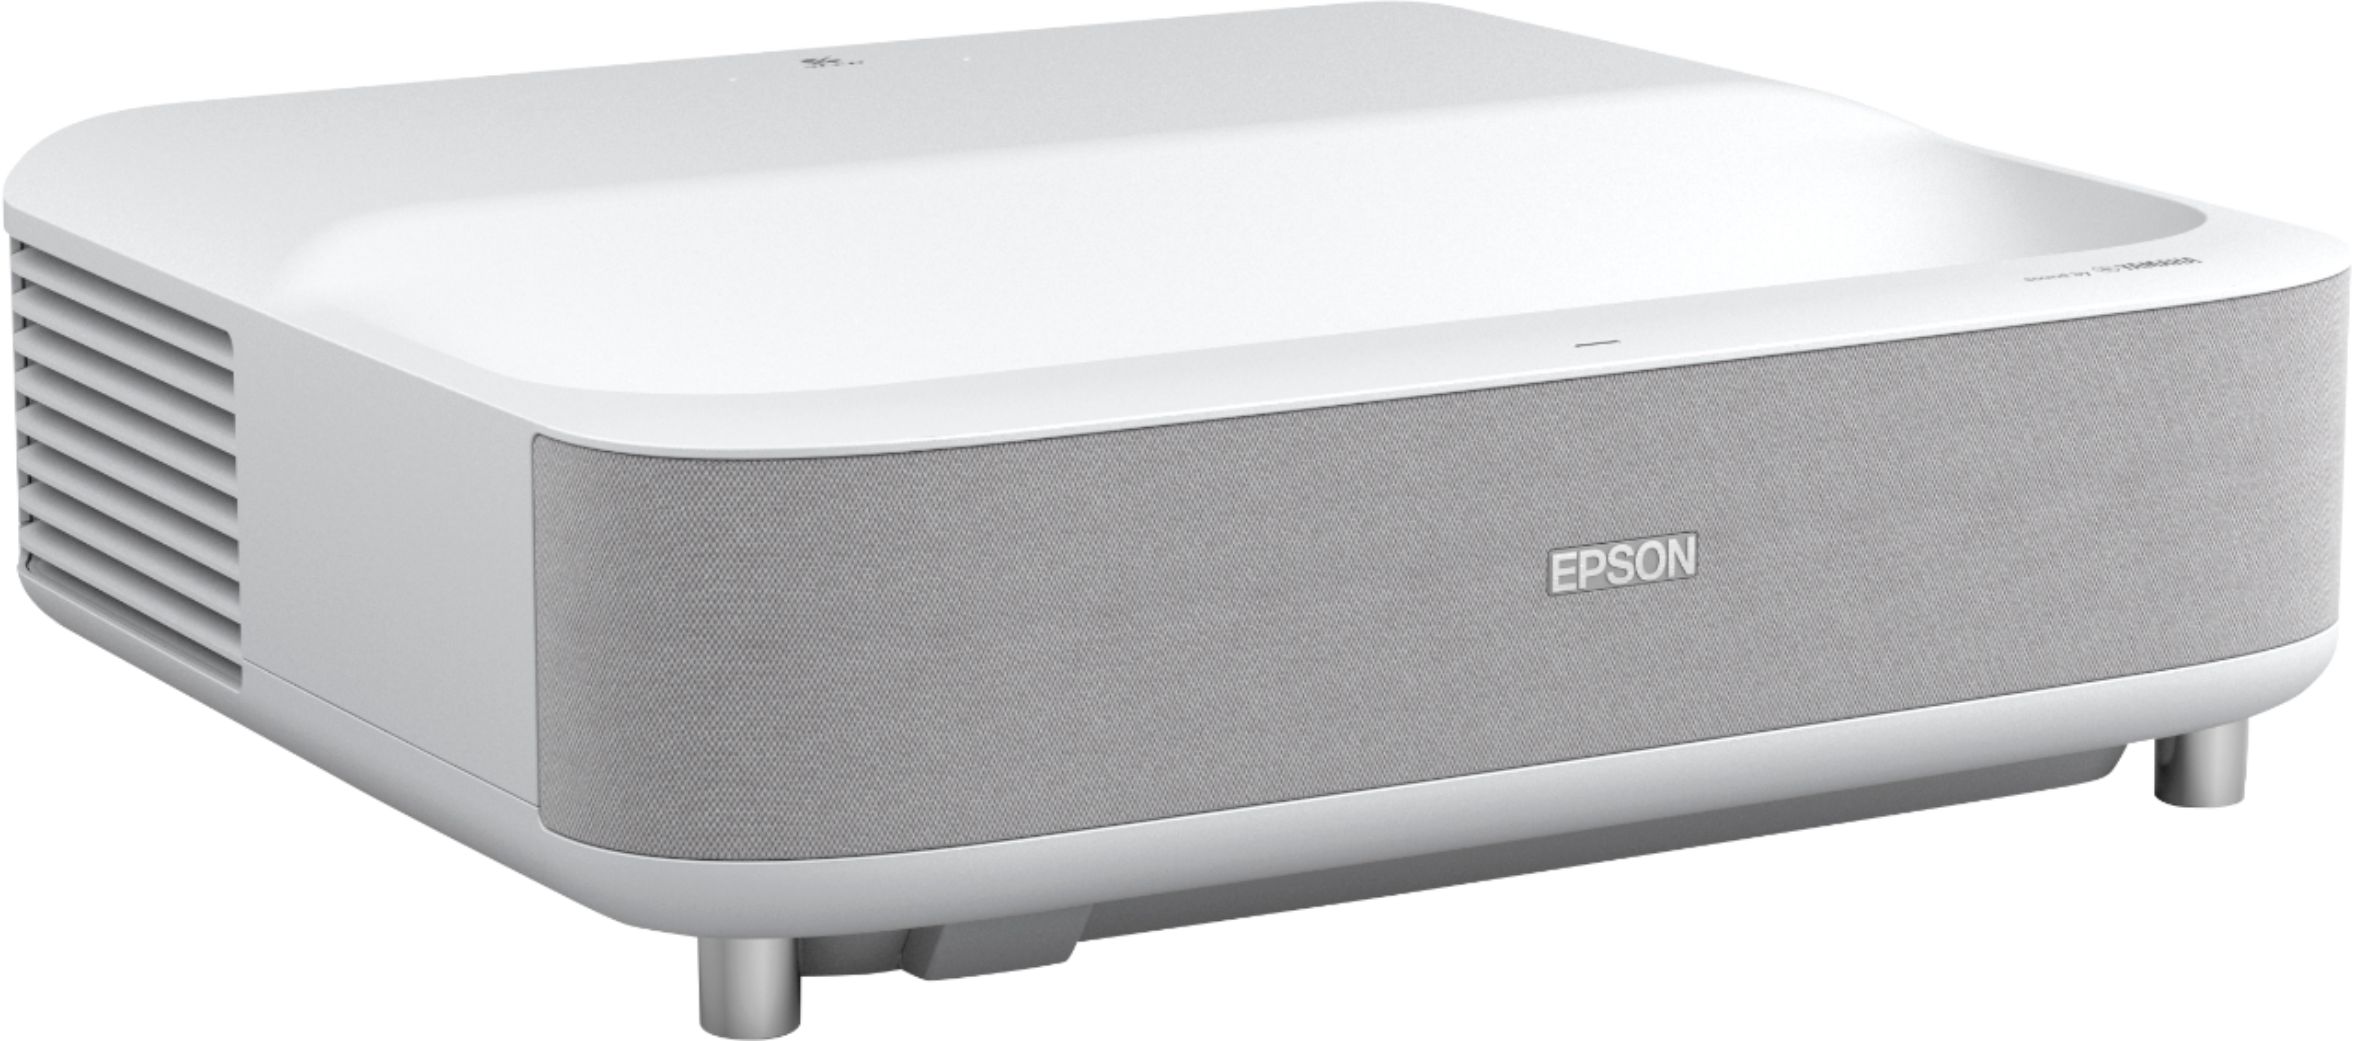 Angle View: Epson - EpiqVision Ultra LS300 Smart Streaming Laser Short Throw Projector, 3600 lumens, HDR, Android TV, Sports - White